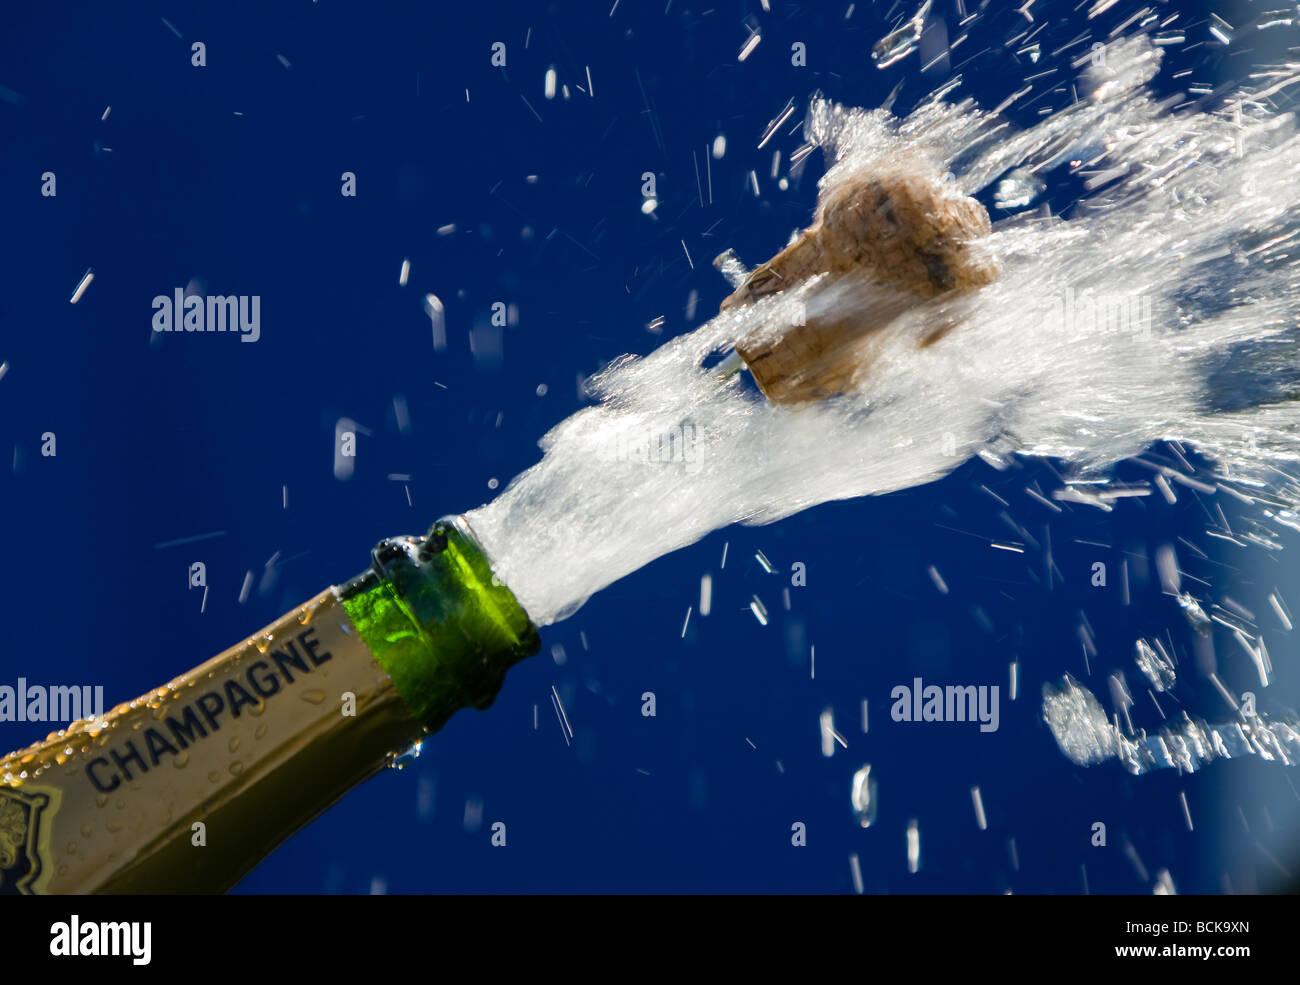 popping cork of an open champagne bottle Stock Photo - Alamy